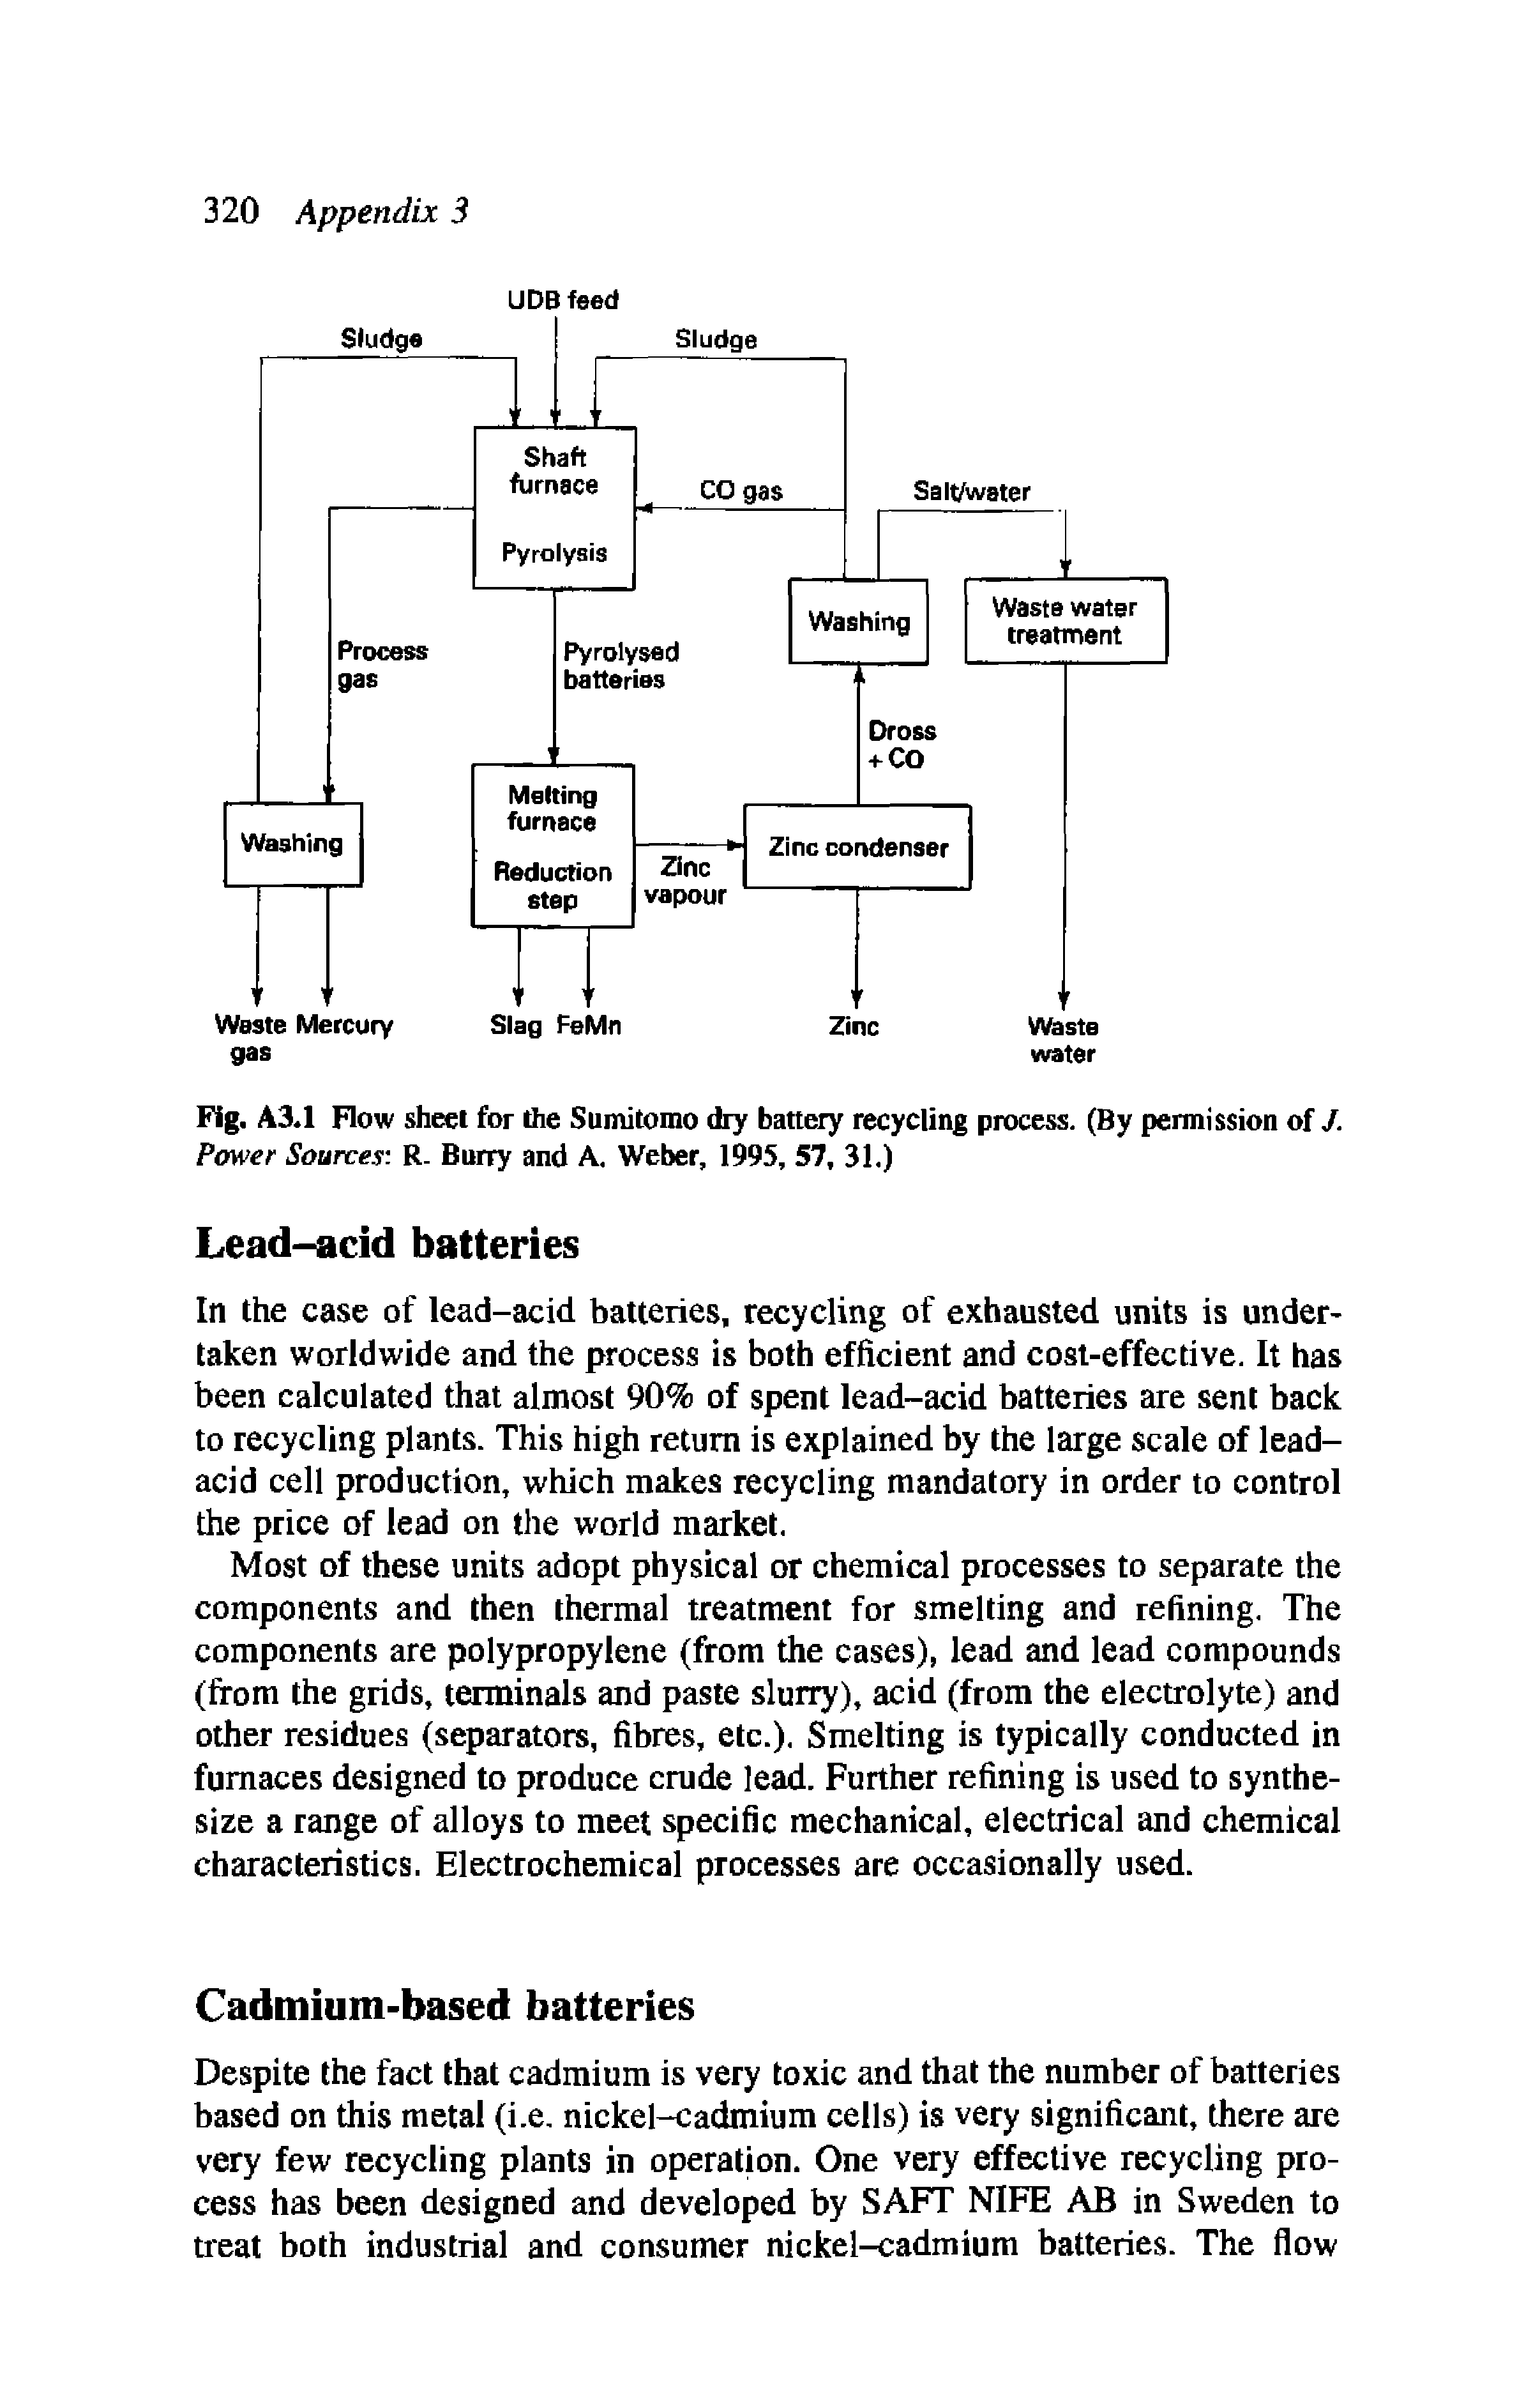 Fig. A3.1 Flow sheet for the Sumitomo dry battery recycling process. (By permission of J. Power Sources R. Burry and A. Weber, 1995, 57, 31.)...